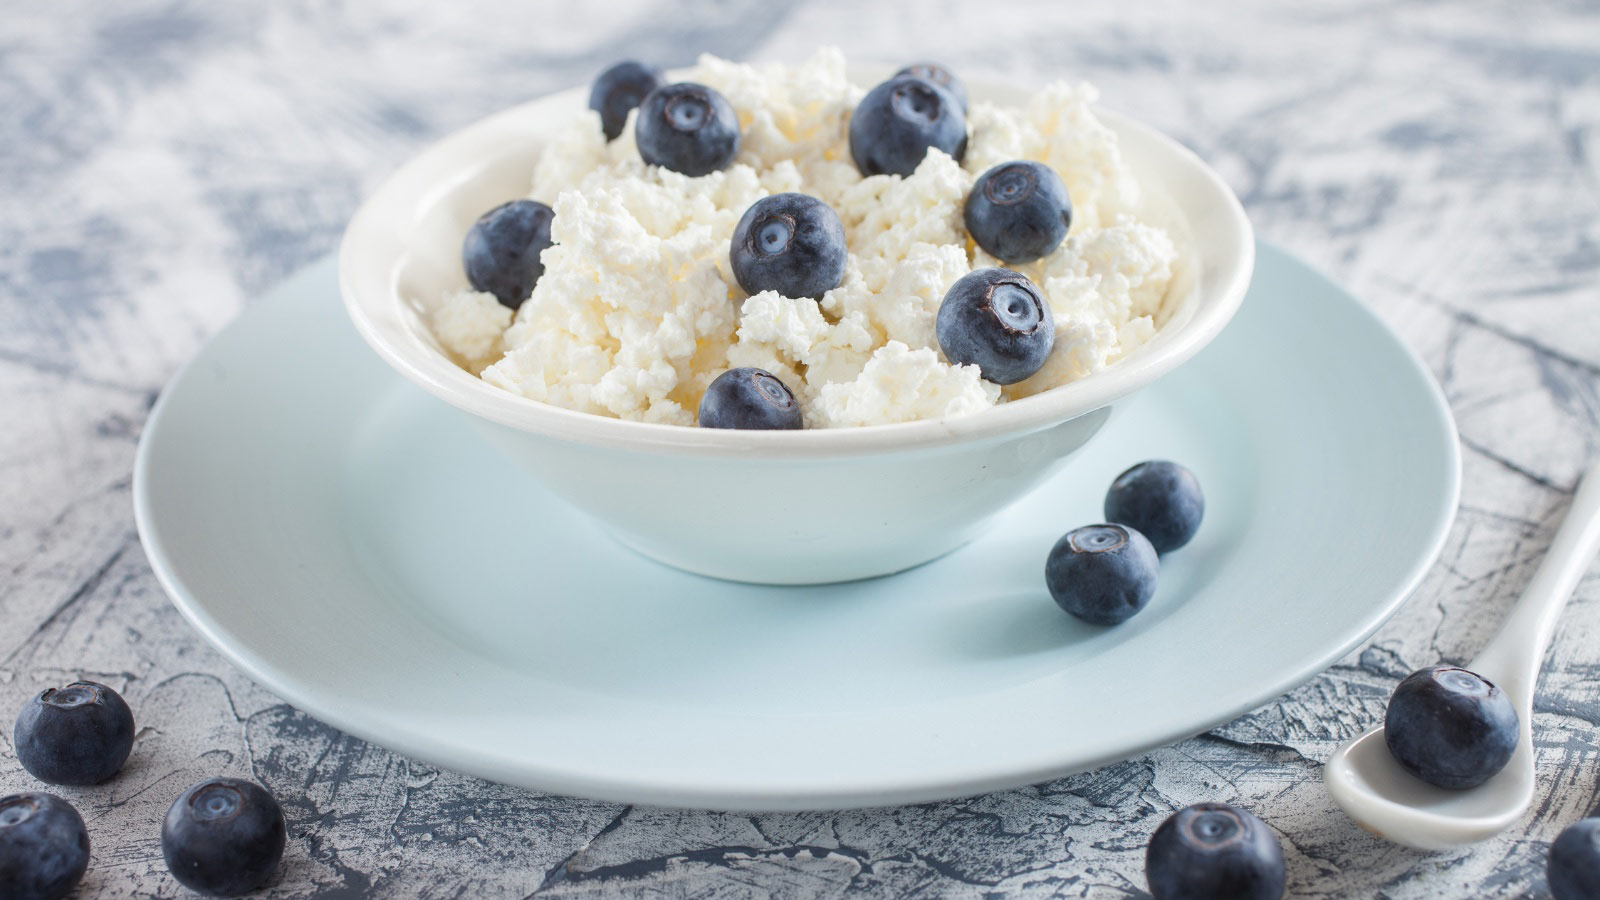 Cottage cheese and blueberry in a bowl on a table.